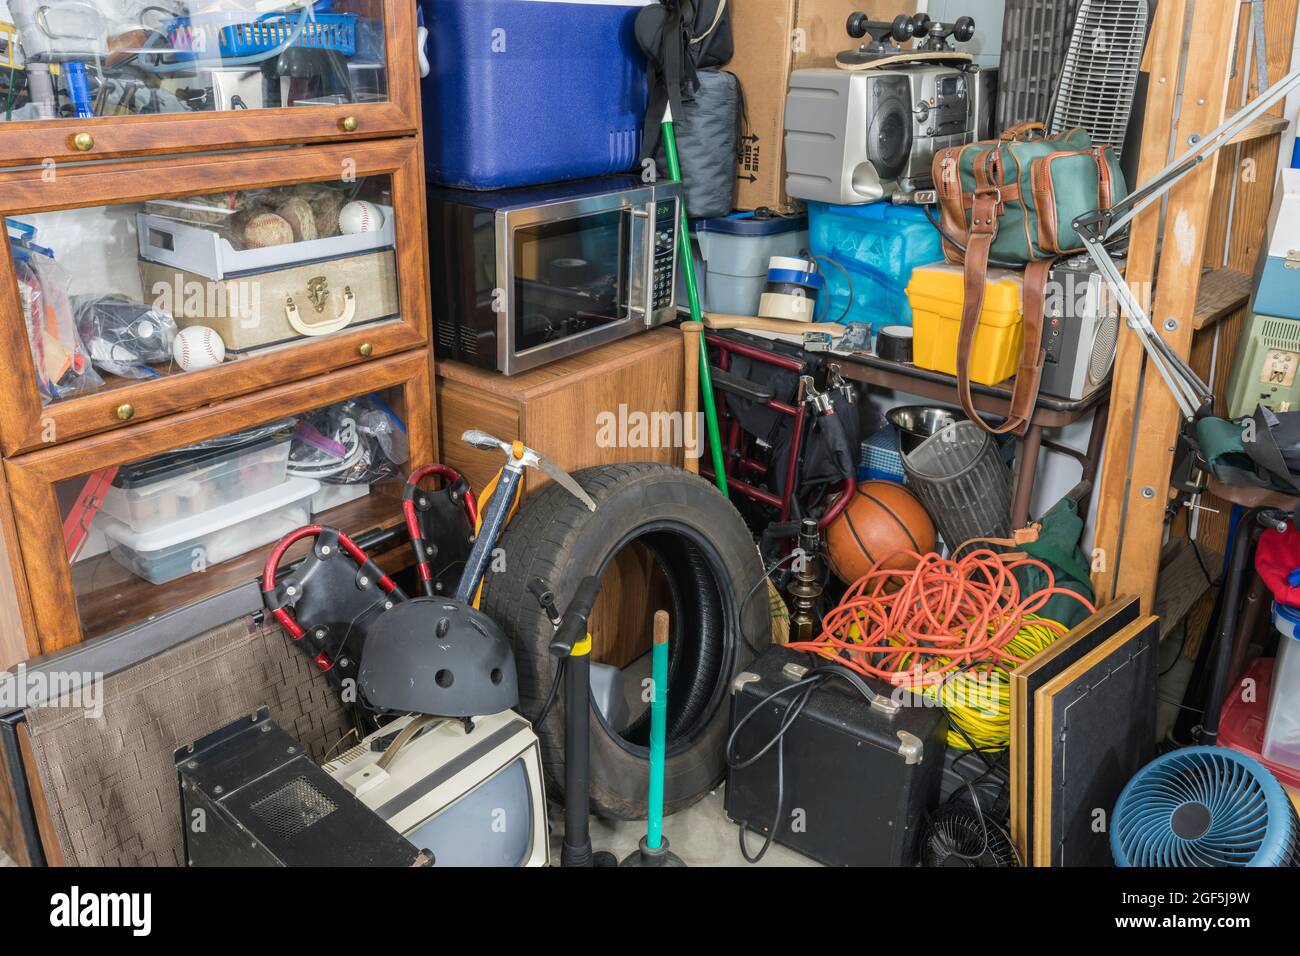 Storage clutter and household junk filling garage corner. Stock Photo